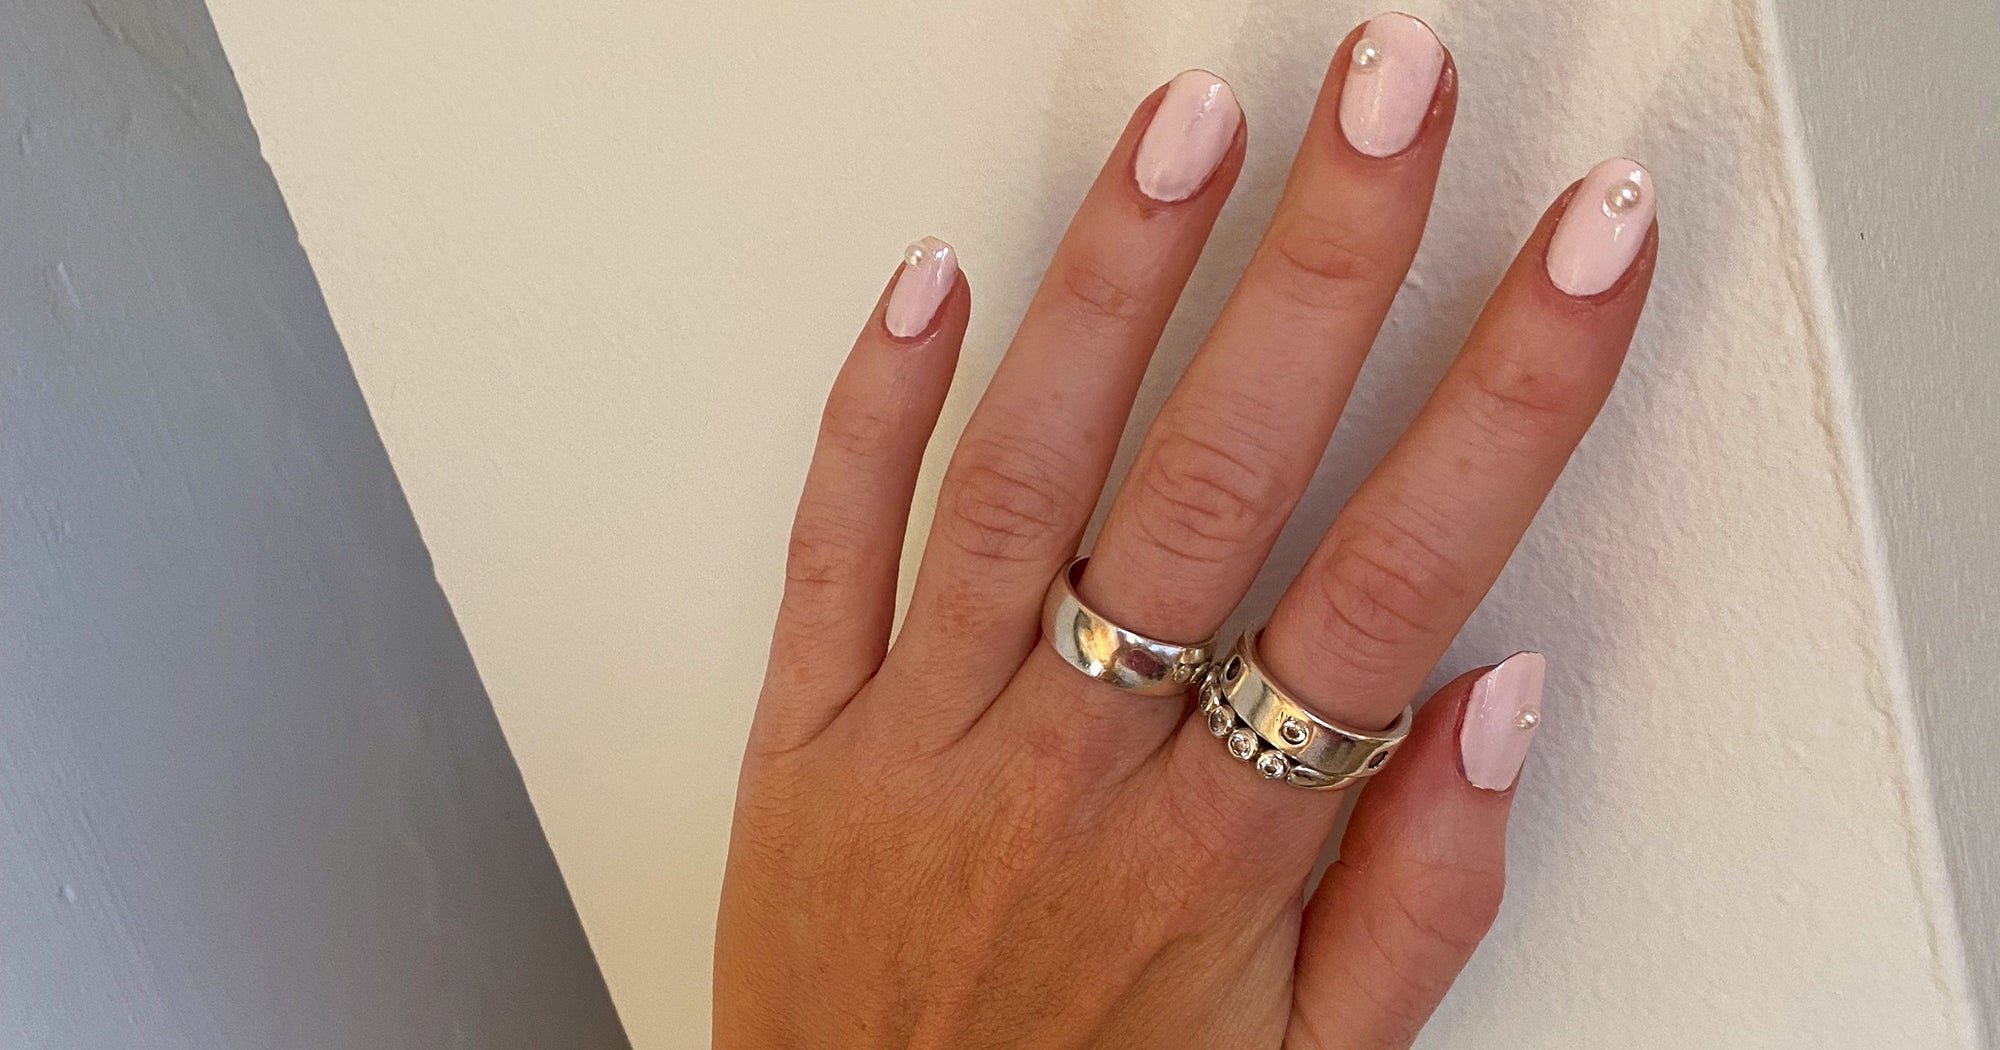 5. The Best Pearl Nail Art on Instagram - wide 4